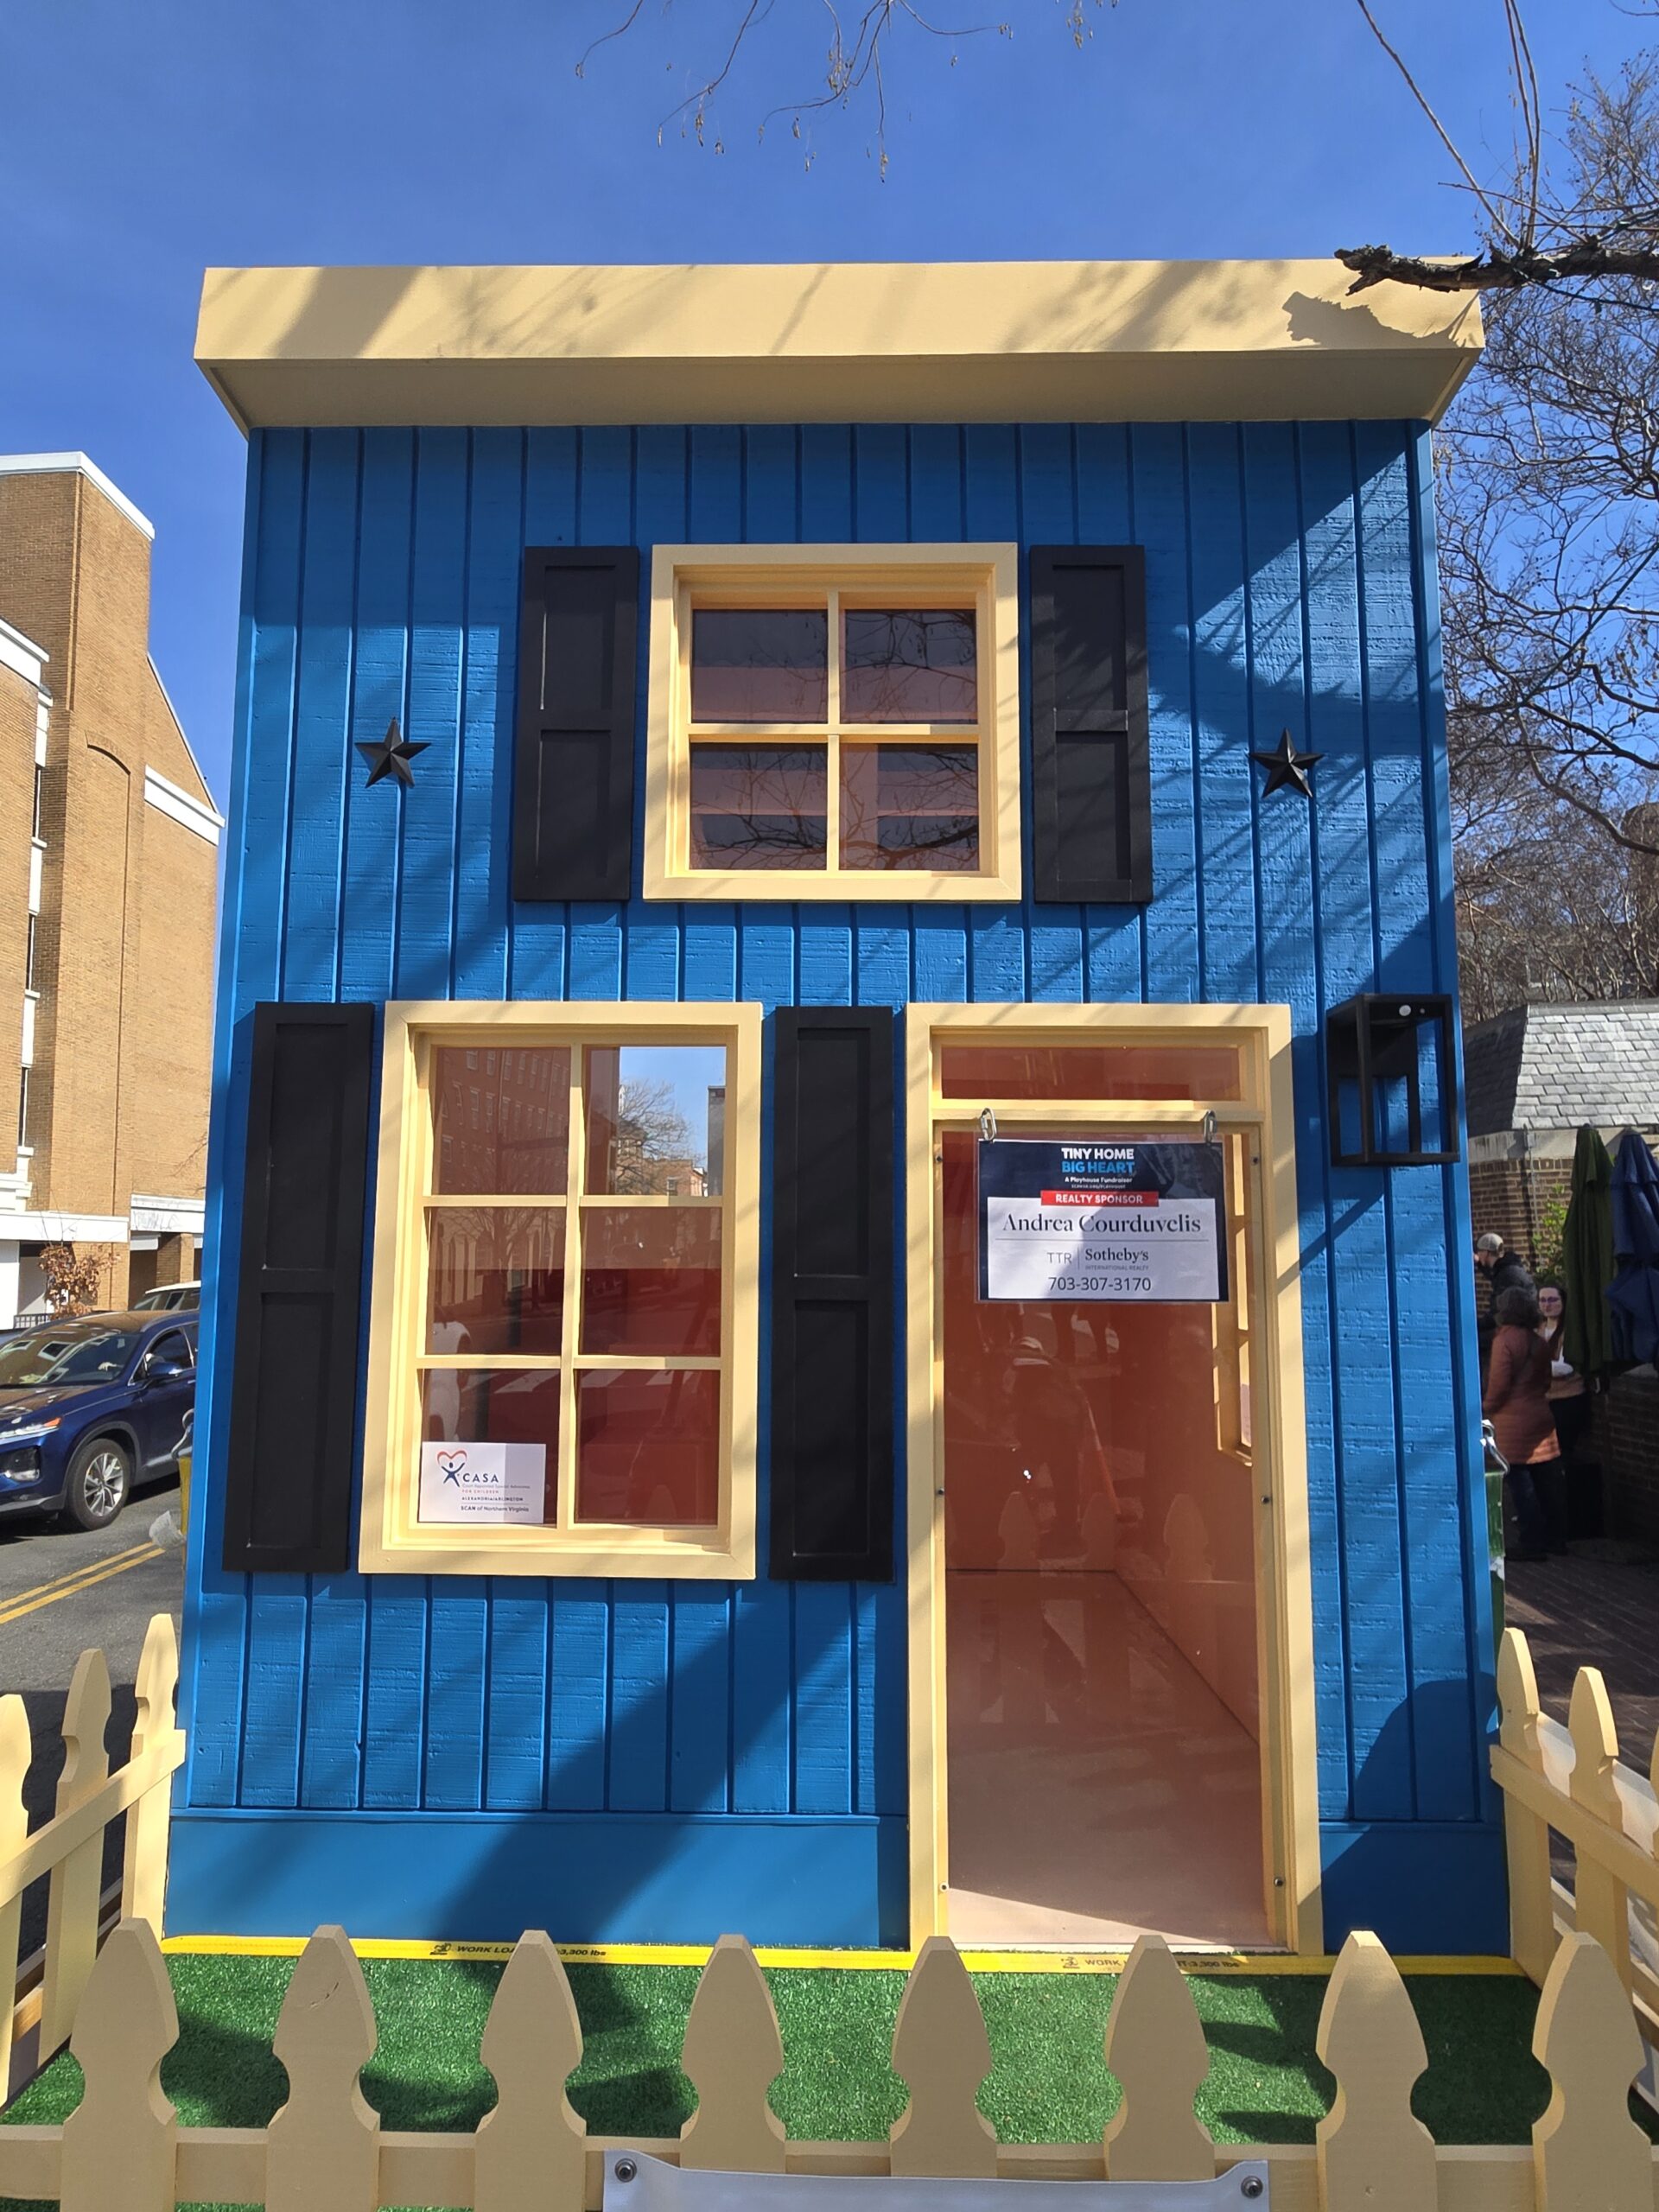 Blue wooden townhouse playhouse with yellow window frames